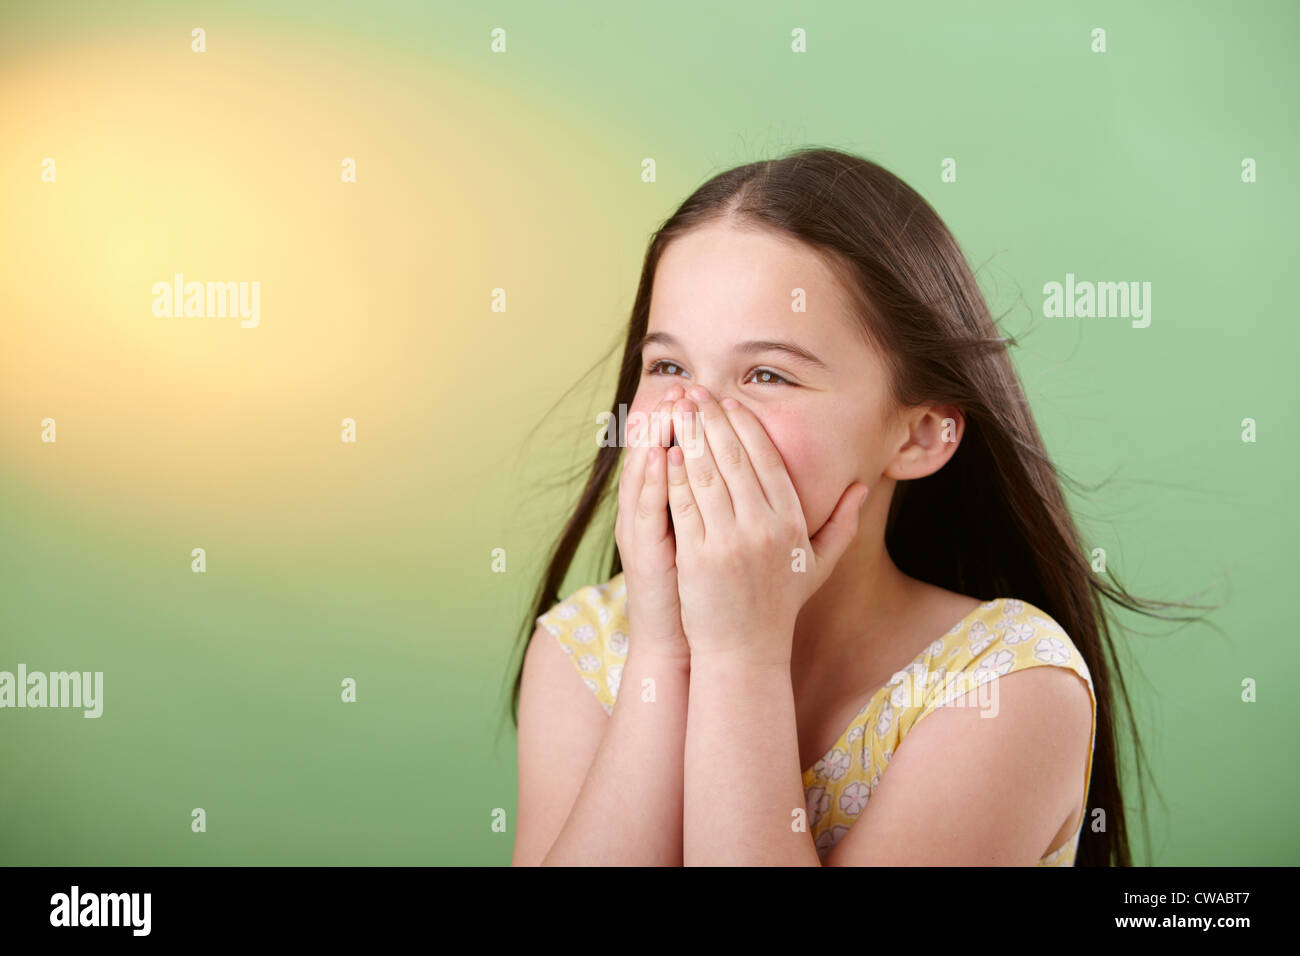 Girl covering mouth Stock Photo